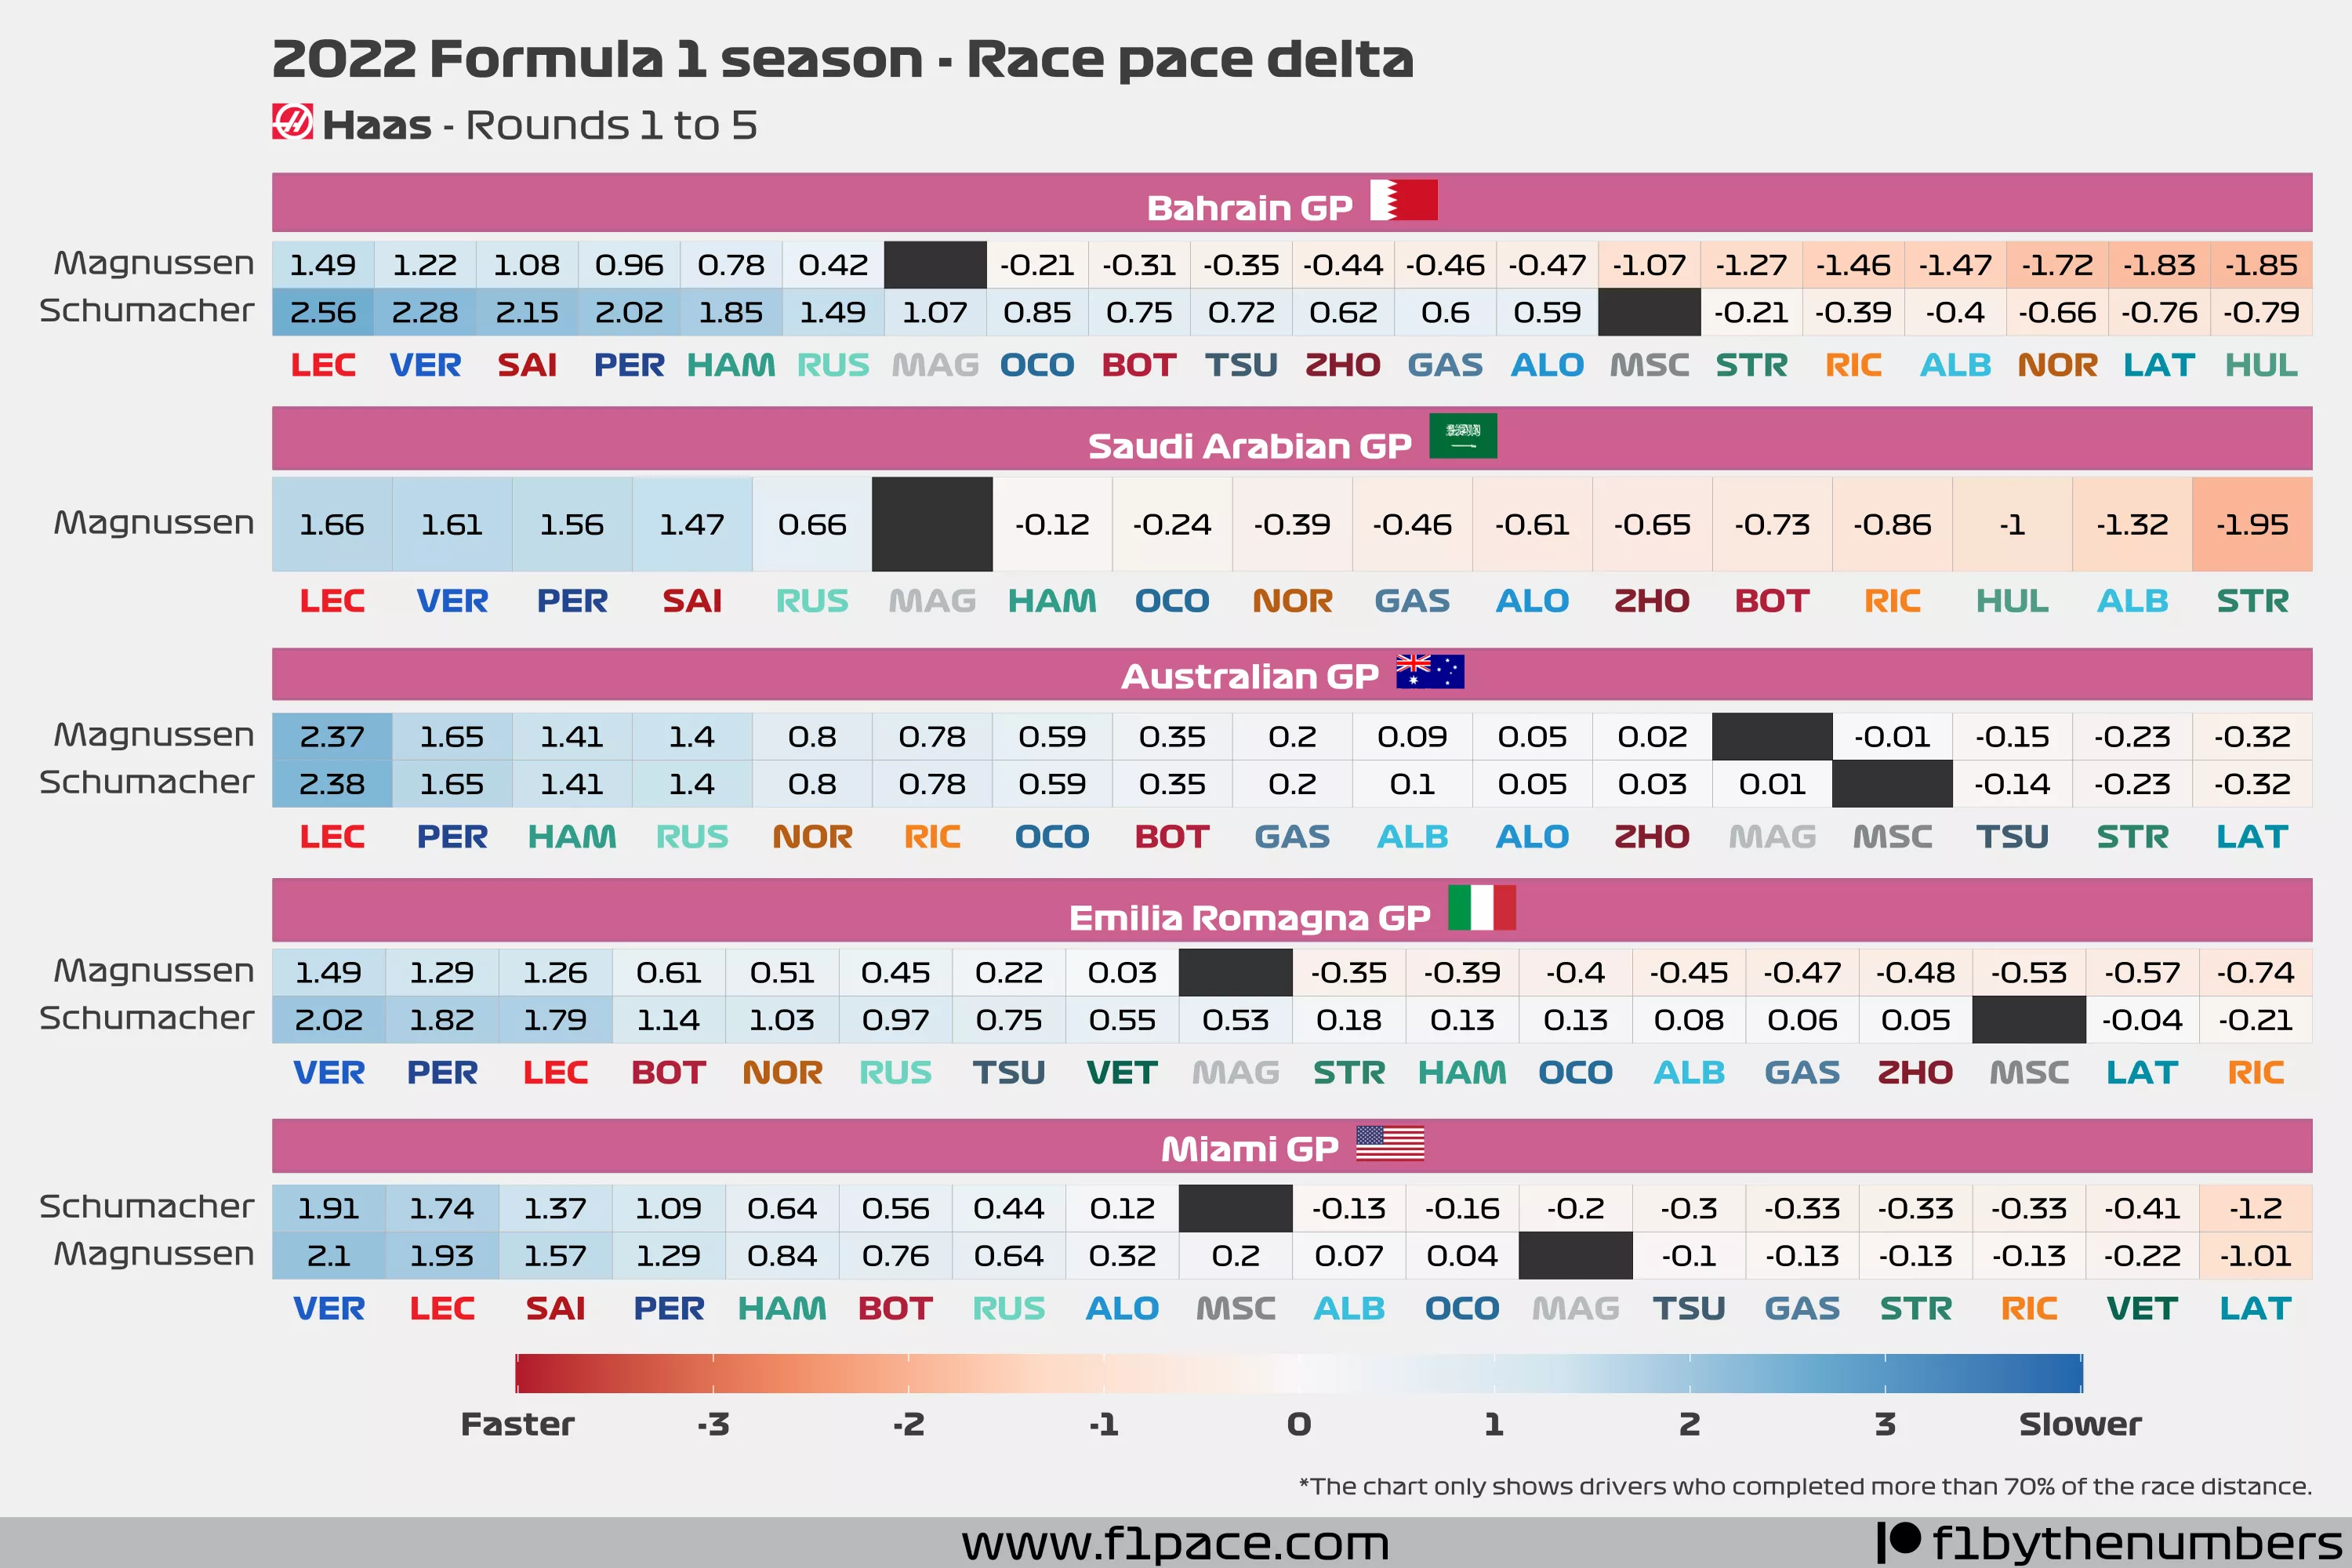 Race pace delta: Rounds to 1 to 5 - Haas